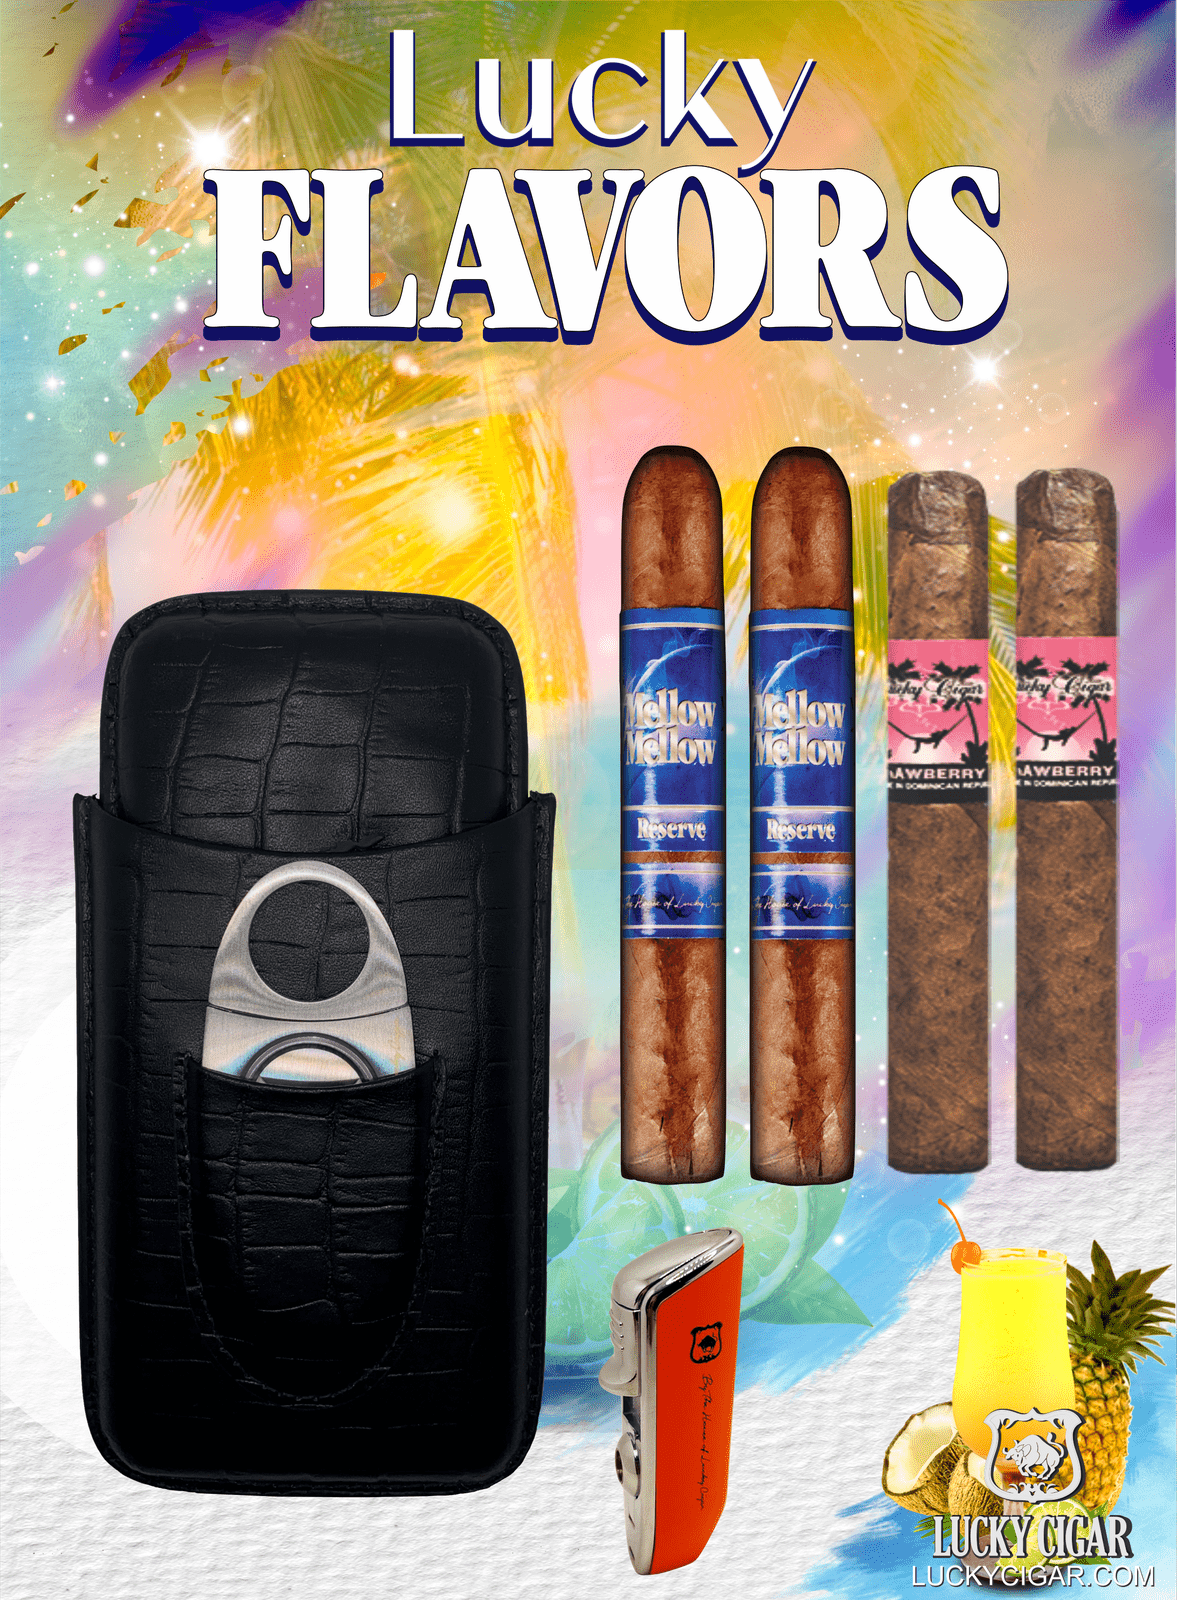 Flavored Cigars: Lucky Flavors and Infused 4 Cigar Set with Humidor and Lighter